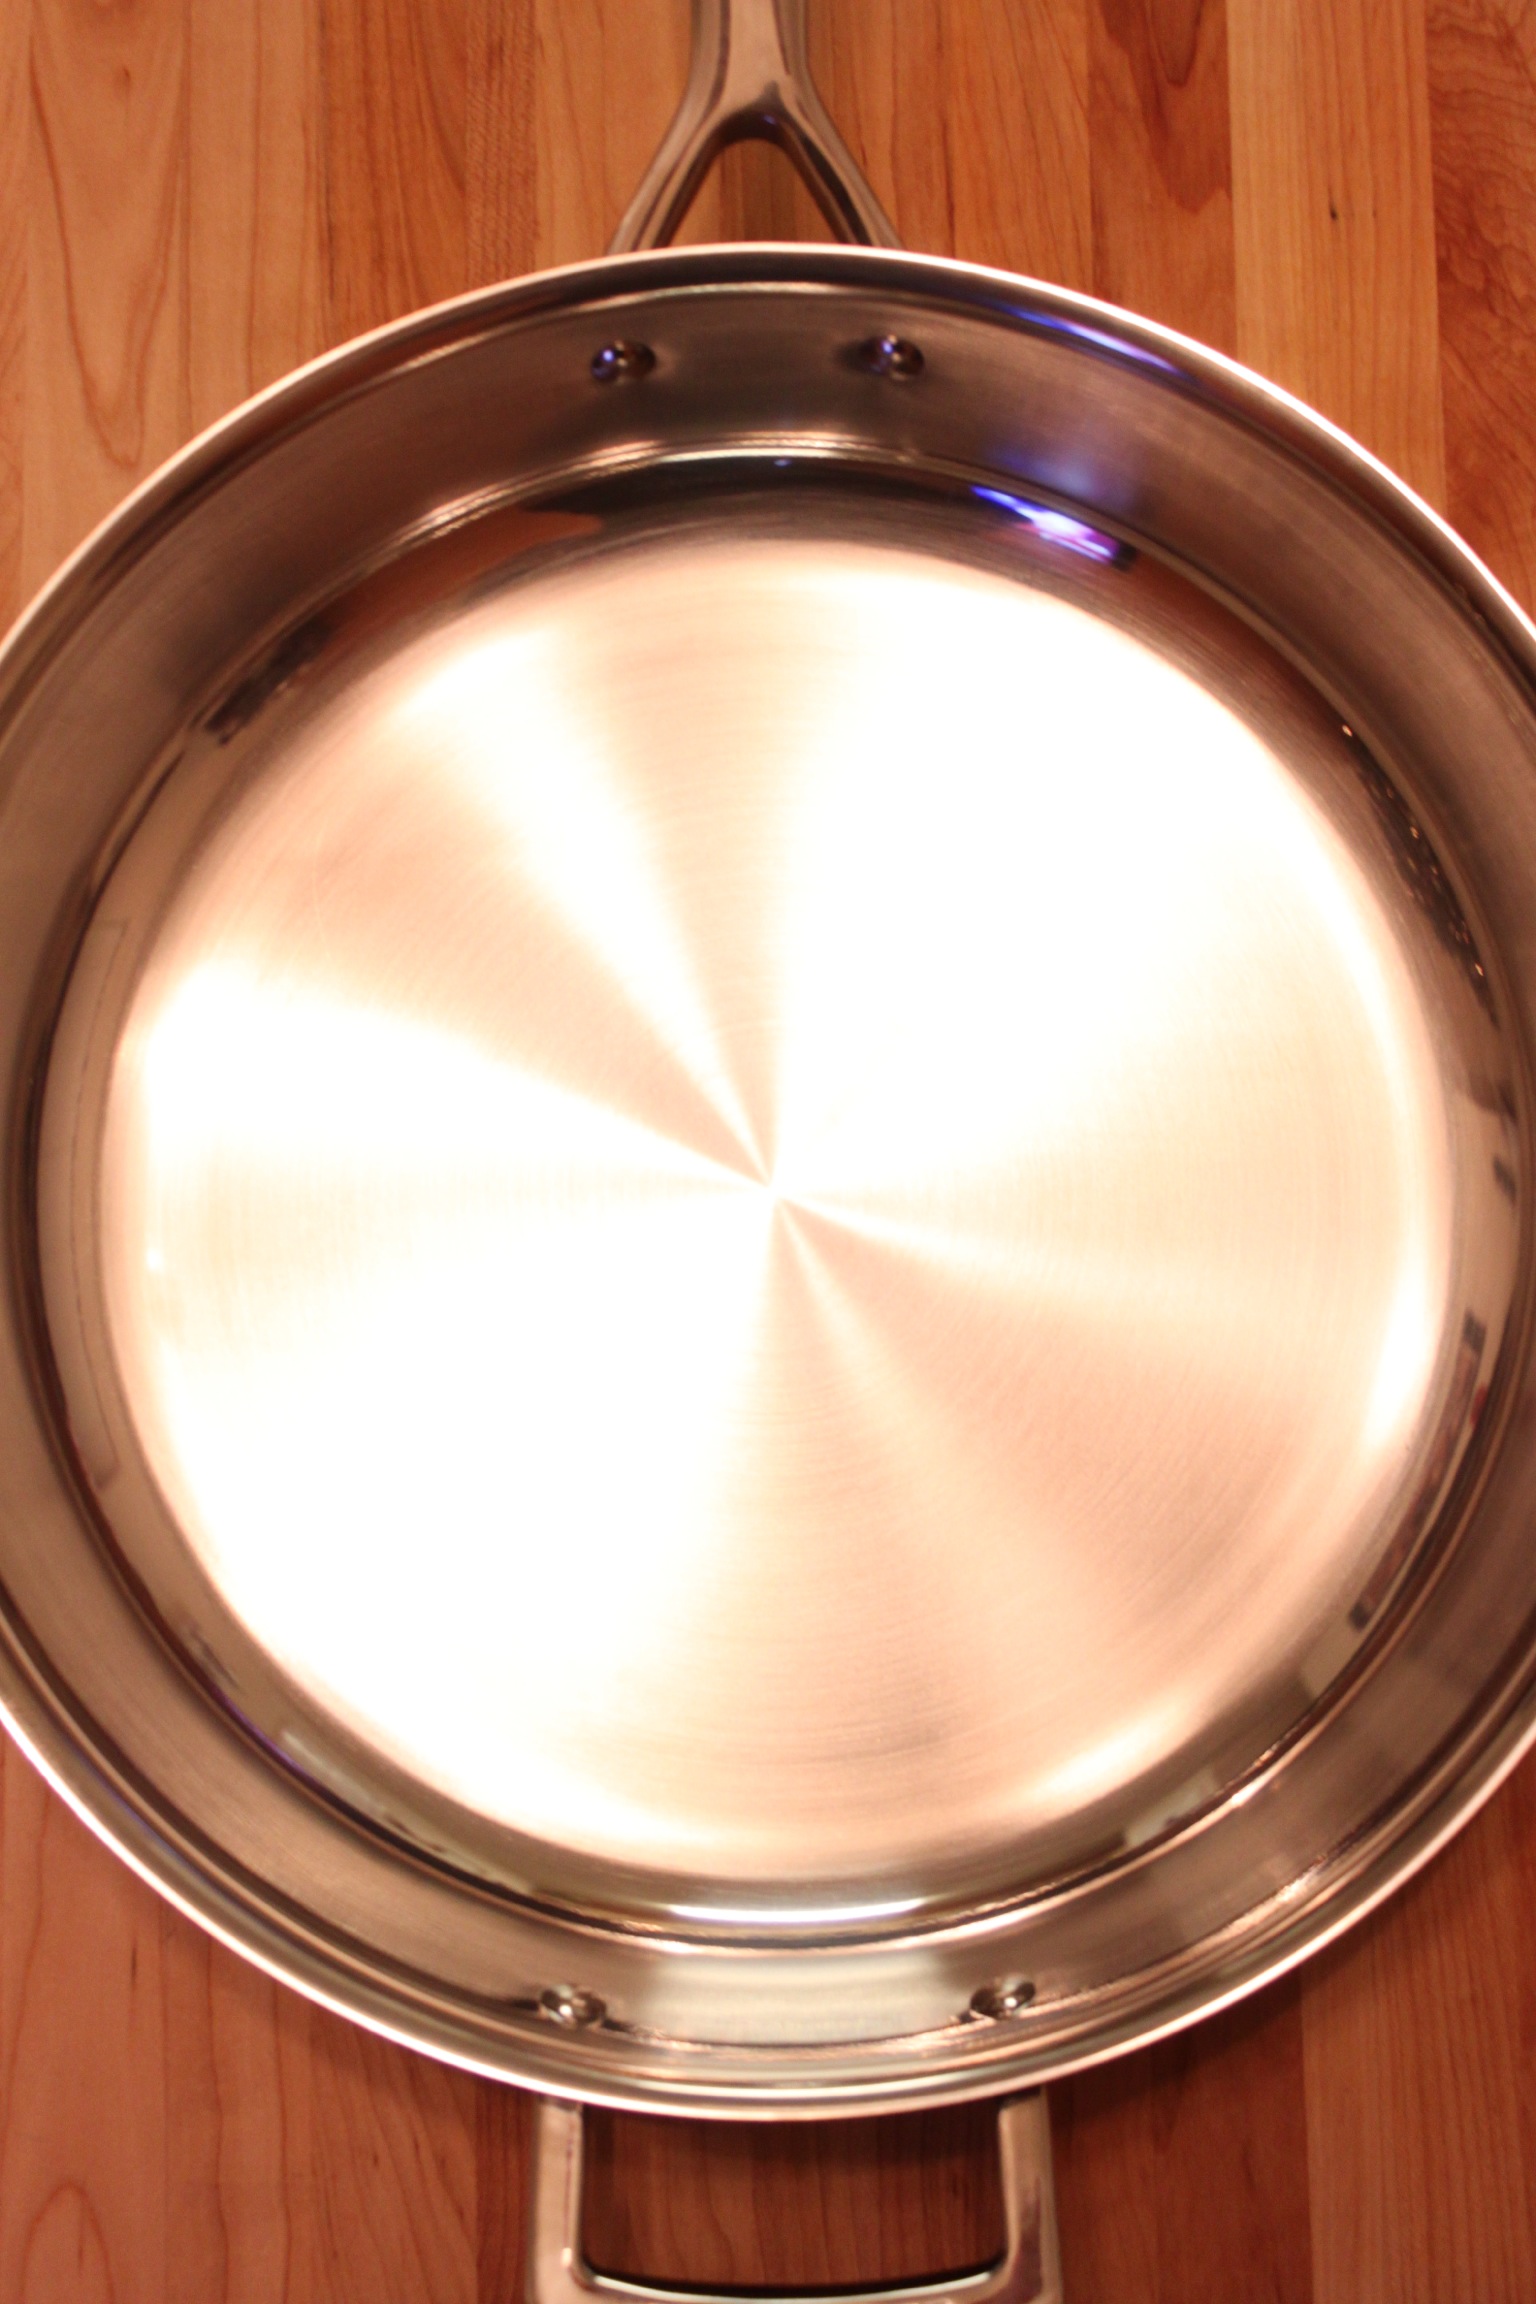 How to Turn a Stainless Steel Skillet into a Nonstick Pan